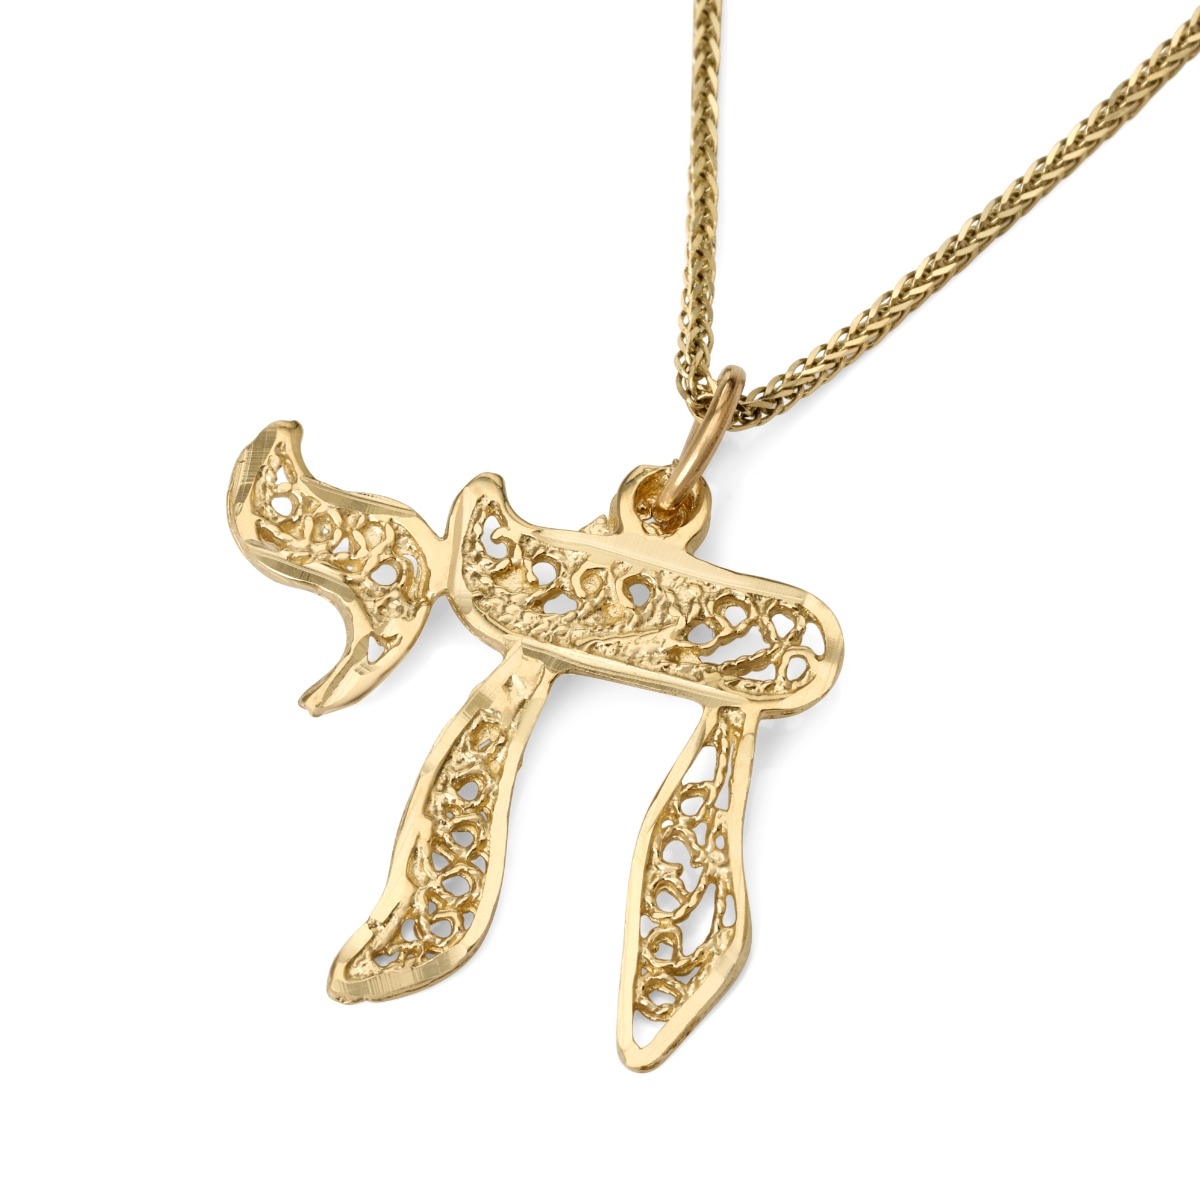 14K Yellow Gold Women’s Chai Pendant Necklace with Ornate Design ...